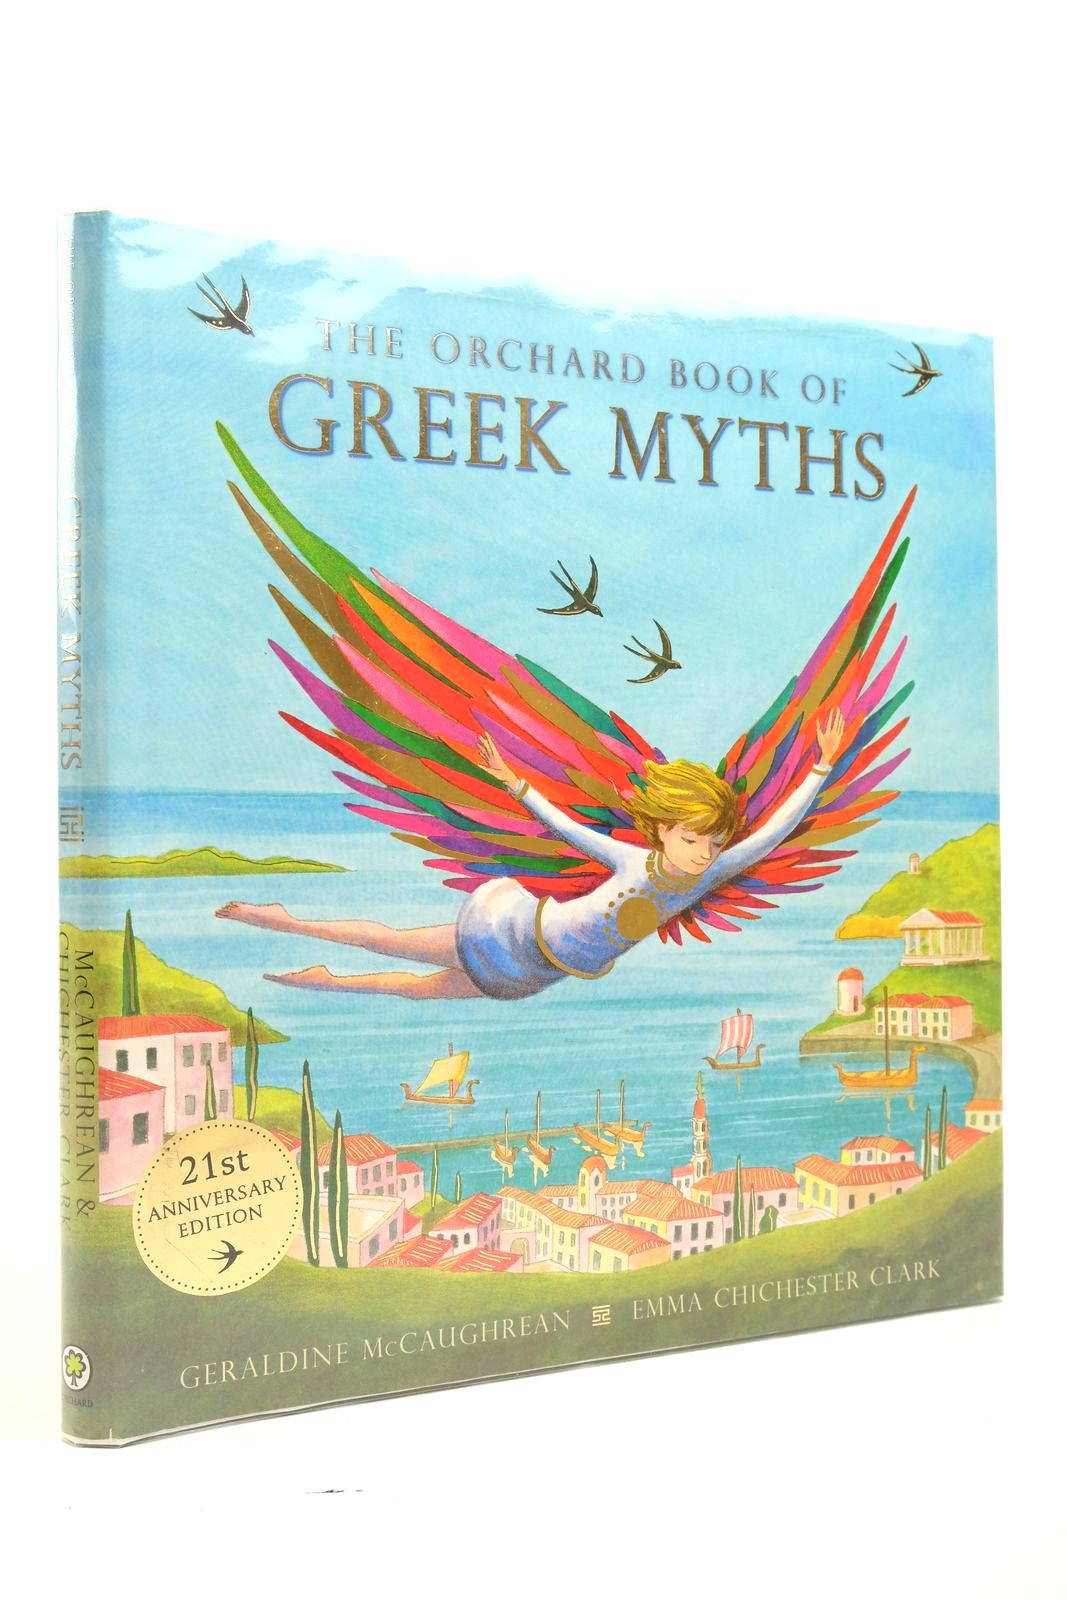 Photo of THE ORCHARD BOOK OF GREEK MYTHS written by McCaughrean, Geraldine illustrated by Clark, Emma Chichester published by Orchard Books (STOCK CODE: 2139248)  for sale by Stella & Rose's Books